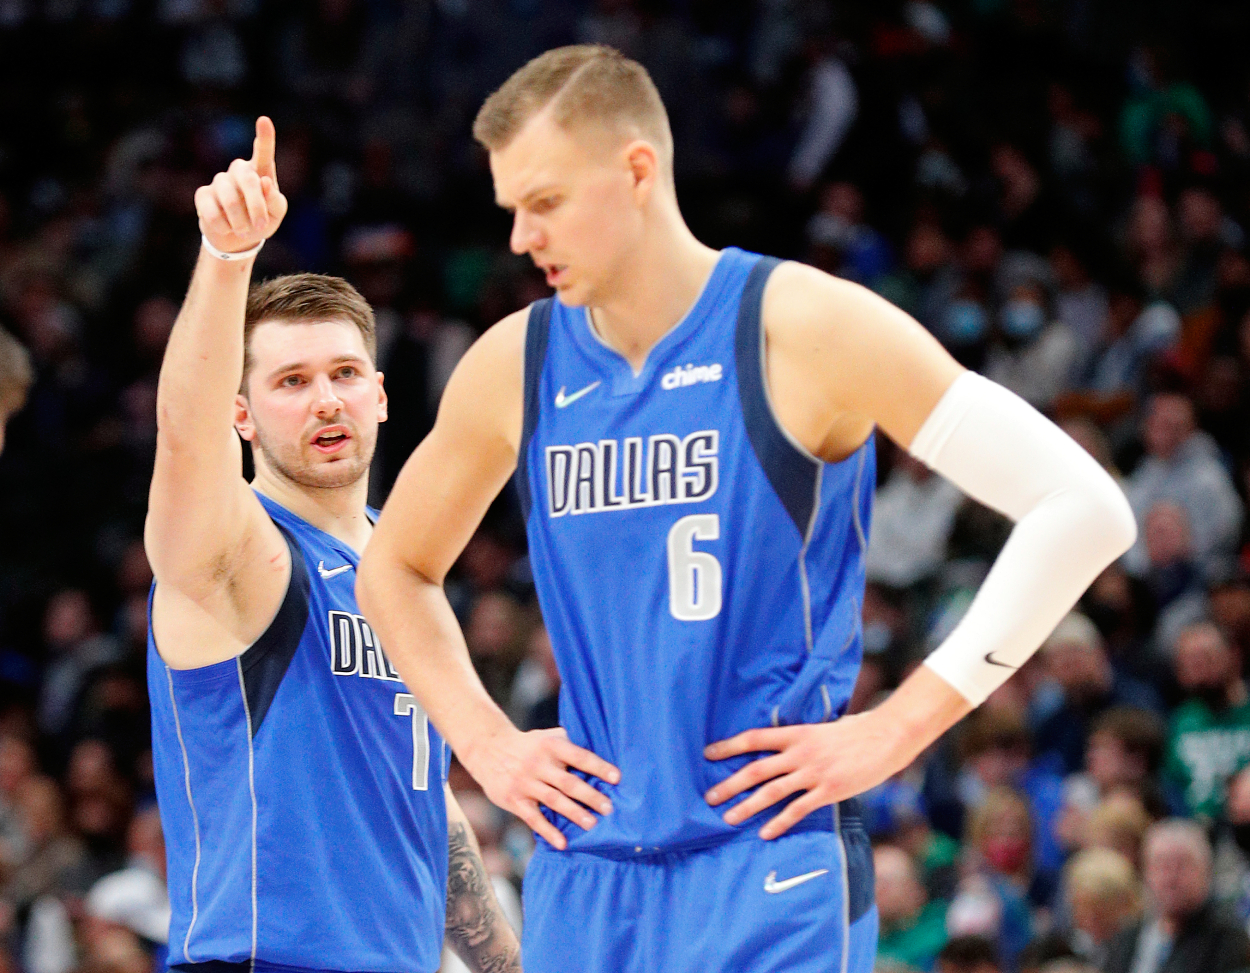 Dallas Mavericks superstar guard Luka Doncic gestures as he talks to now former teammate Kristaps Porzingis in the first half against the Phoenix Suns at American Airlines Center on January 20, 2022 in Dallas, Texas.